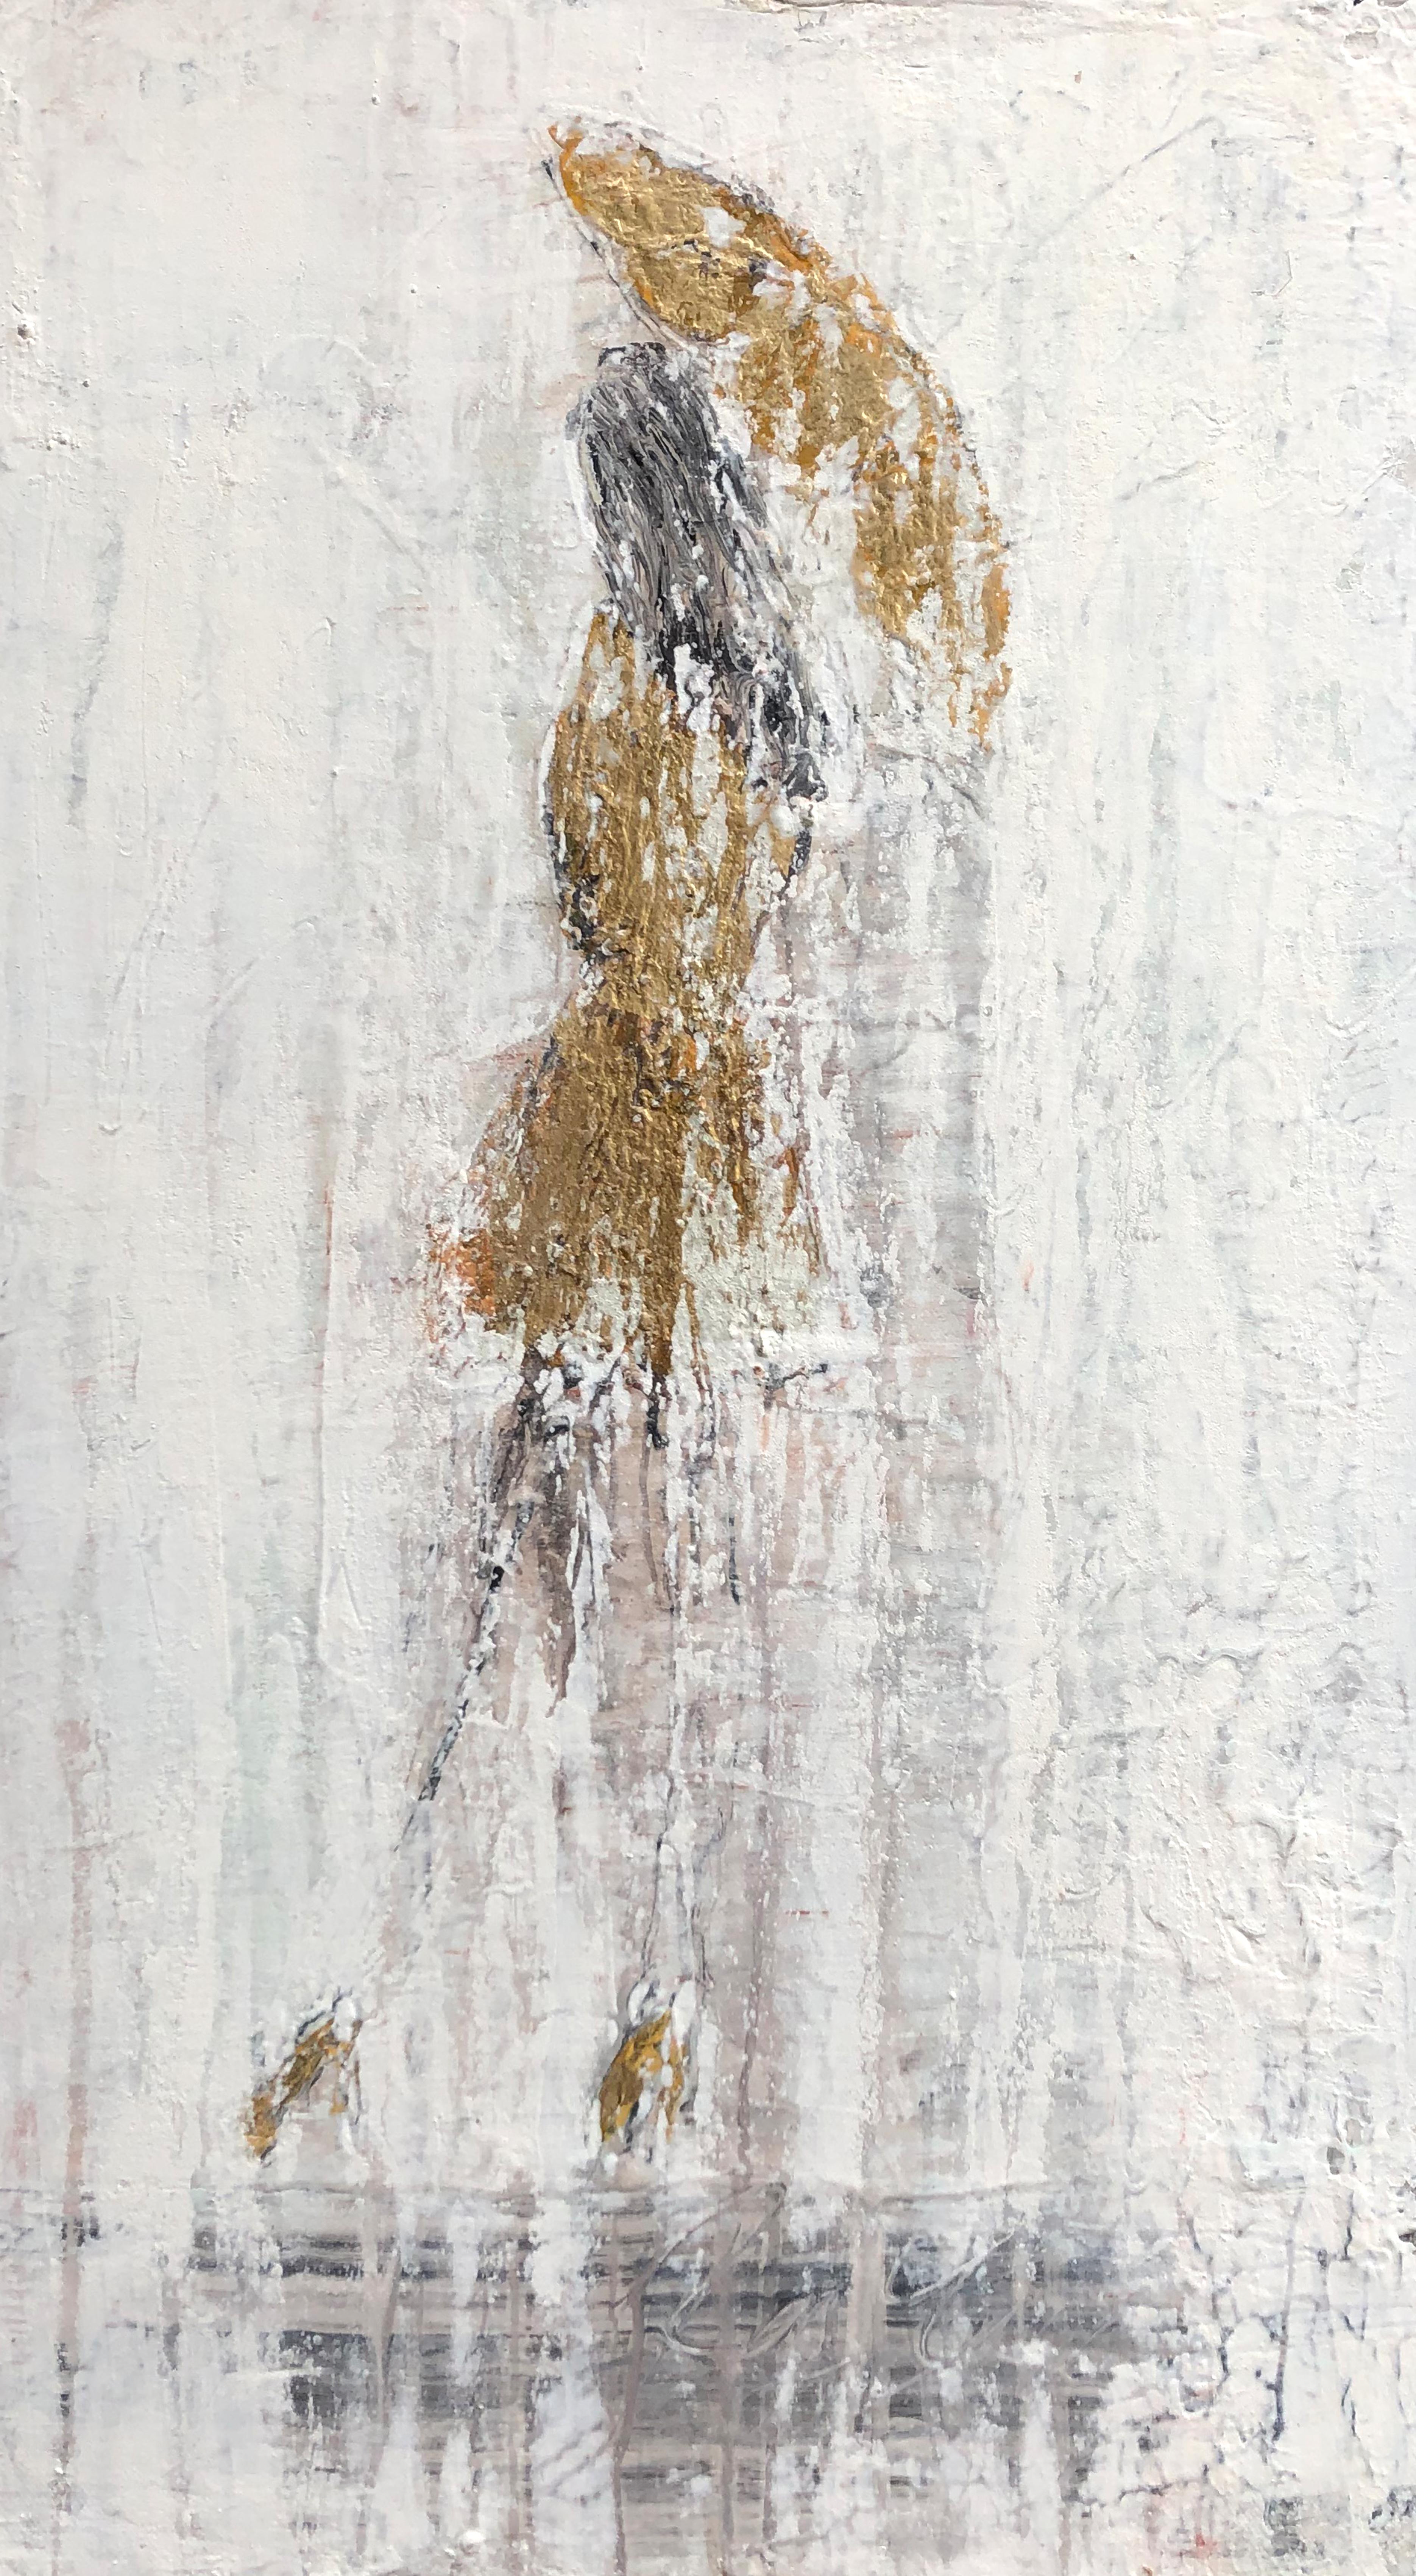 Roger König Figurative Painting - "Girl in the Rain - Gold Edition #2" Abstract, Figurative, 21st Century, Acrylic